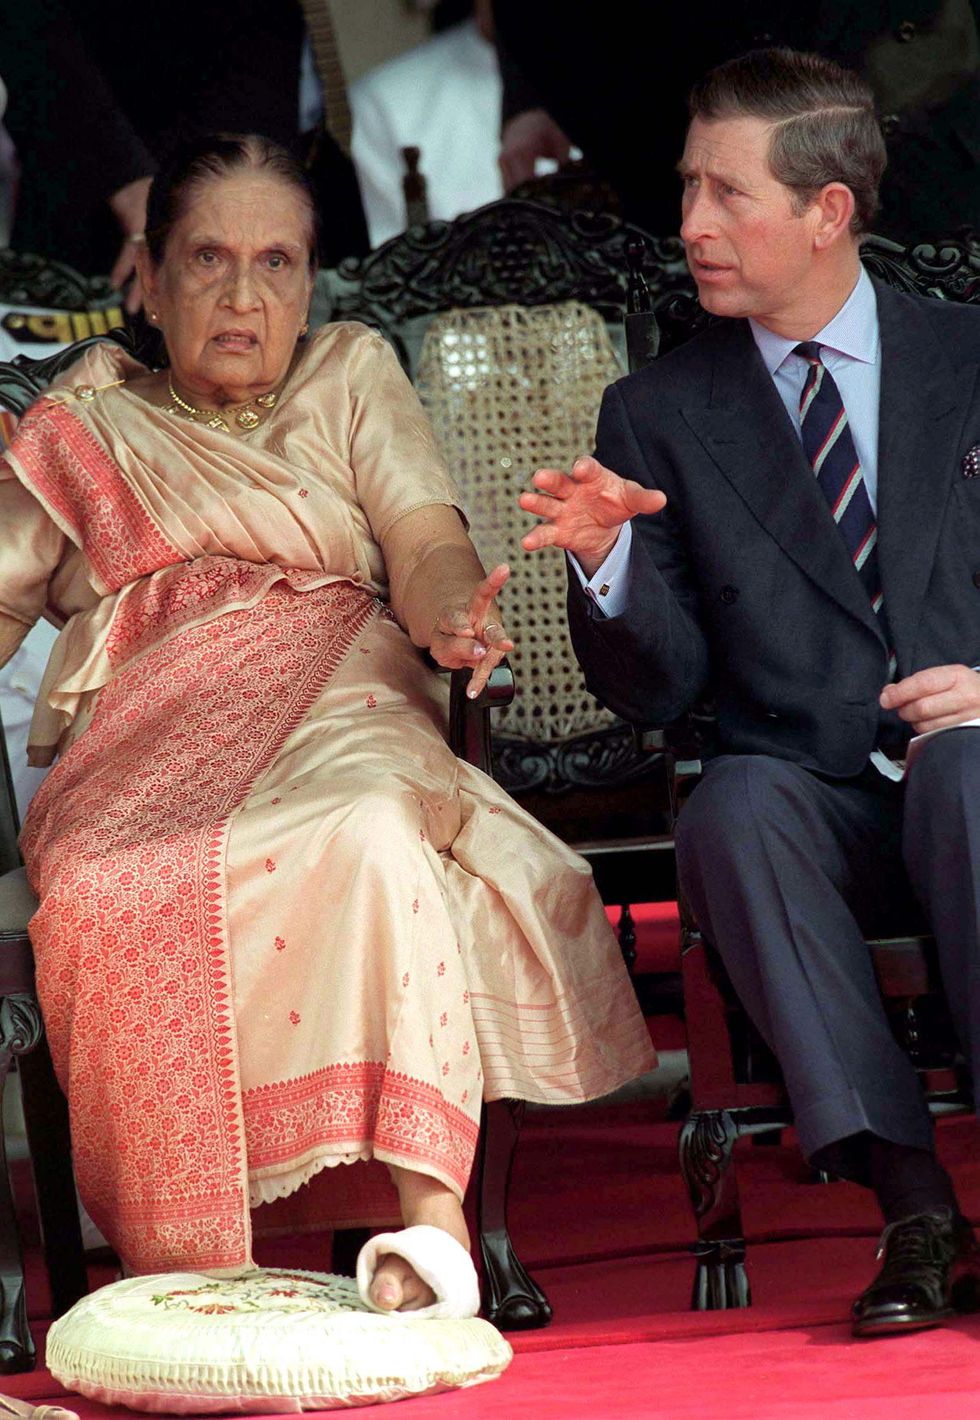 sri lanka   february 04  prince charles with sirimavo bandaranaike , the worlds first woman prime minister and leader of the sri lanka freedom party, during a parade for the 5oth anniversary of independence in colombo, sri lanka  photo by tim graham photo library via getty images